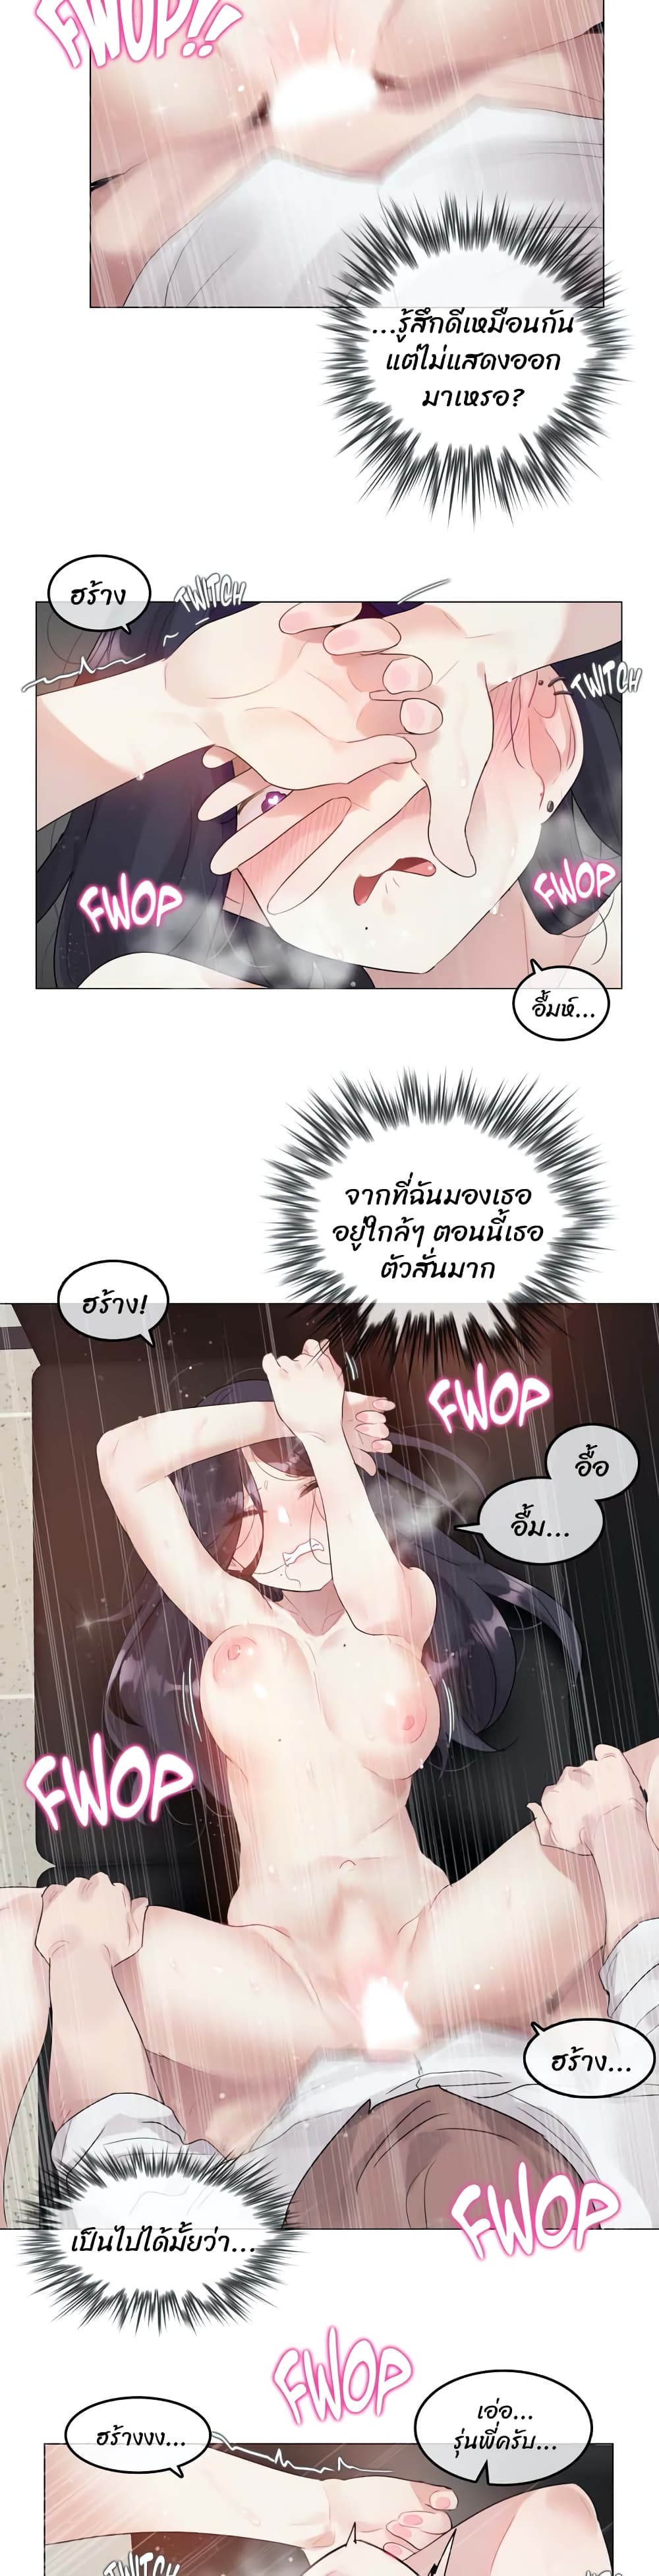 A Pervert's Daily Life 103 (2)